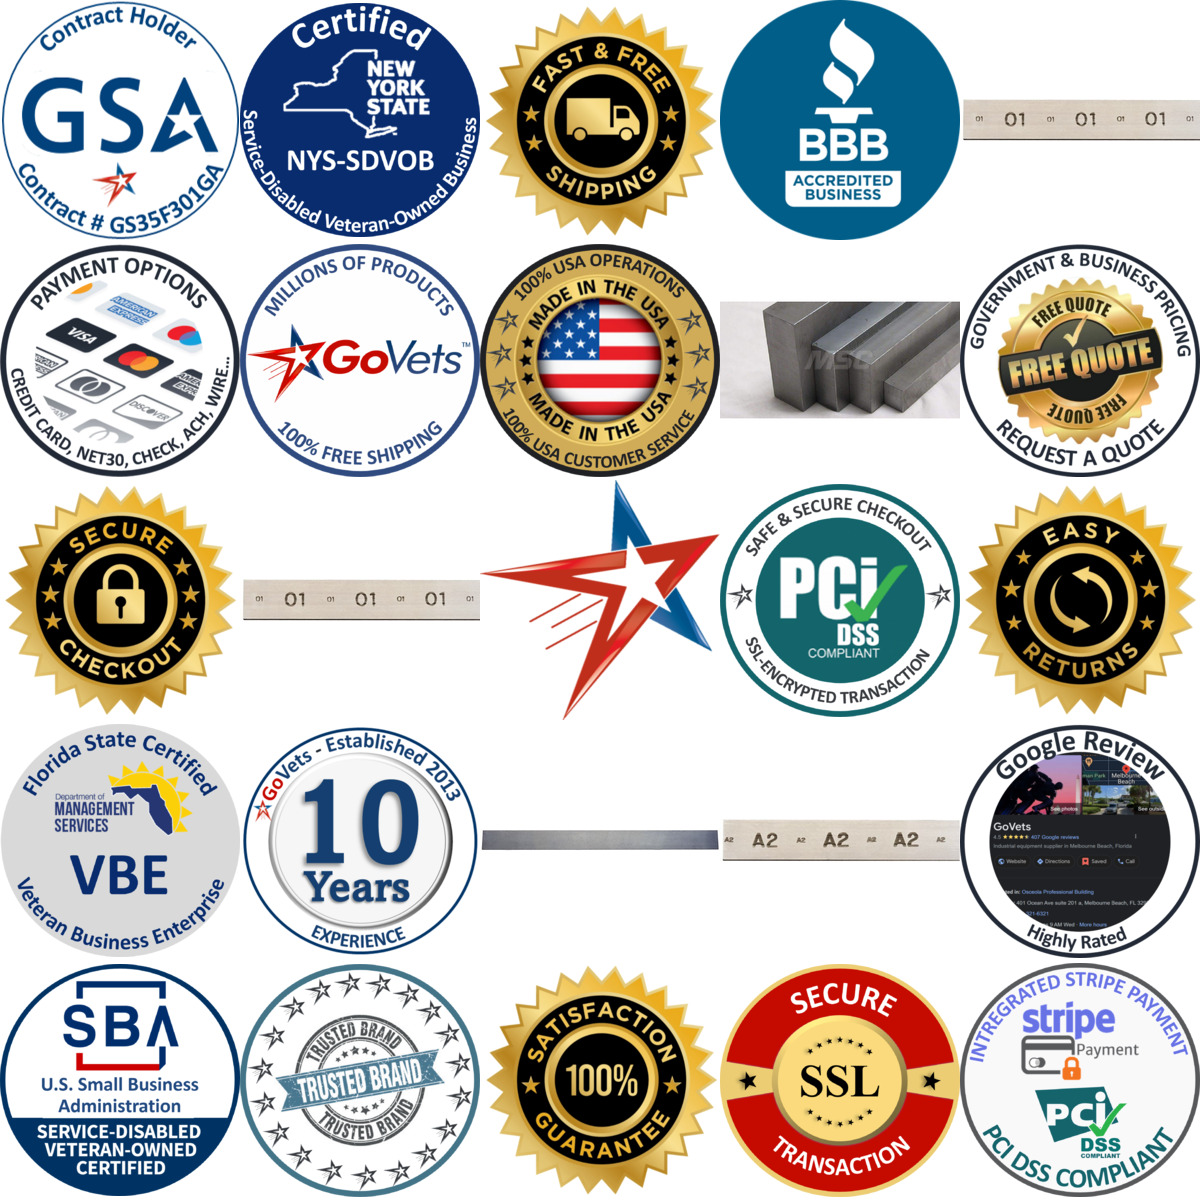 A selection of Flat Stock products on GoVets